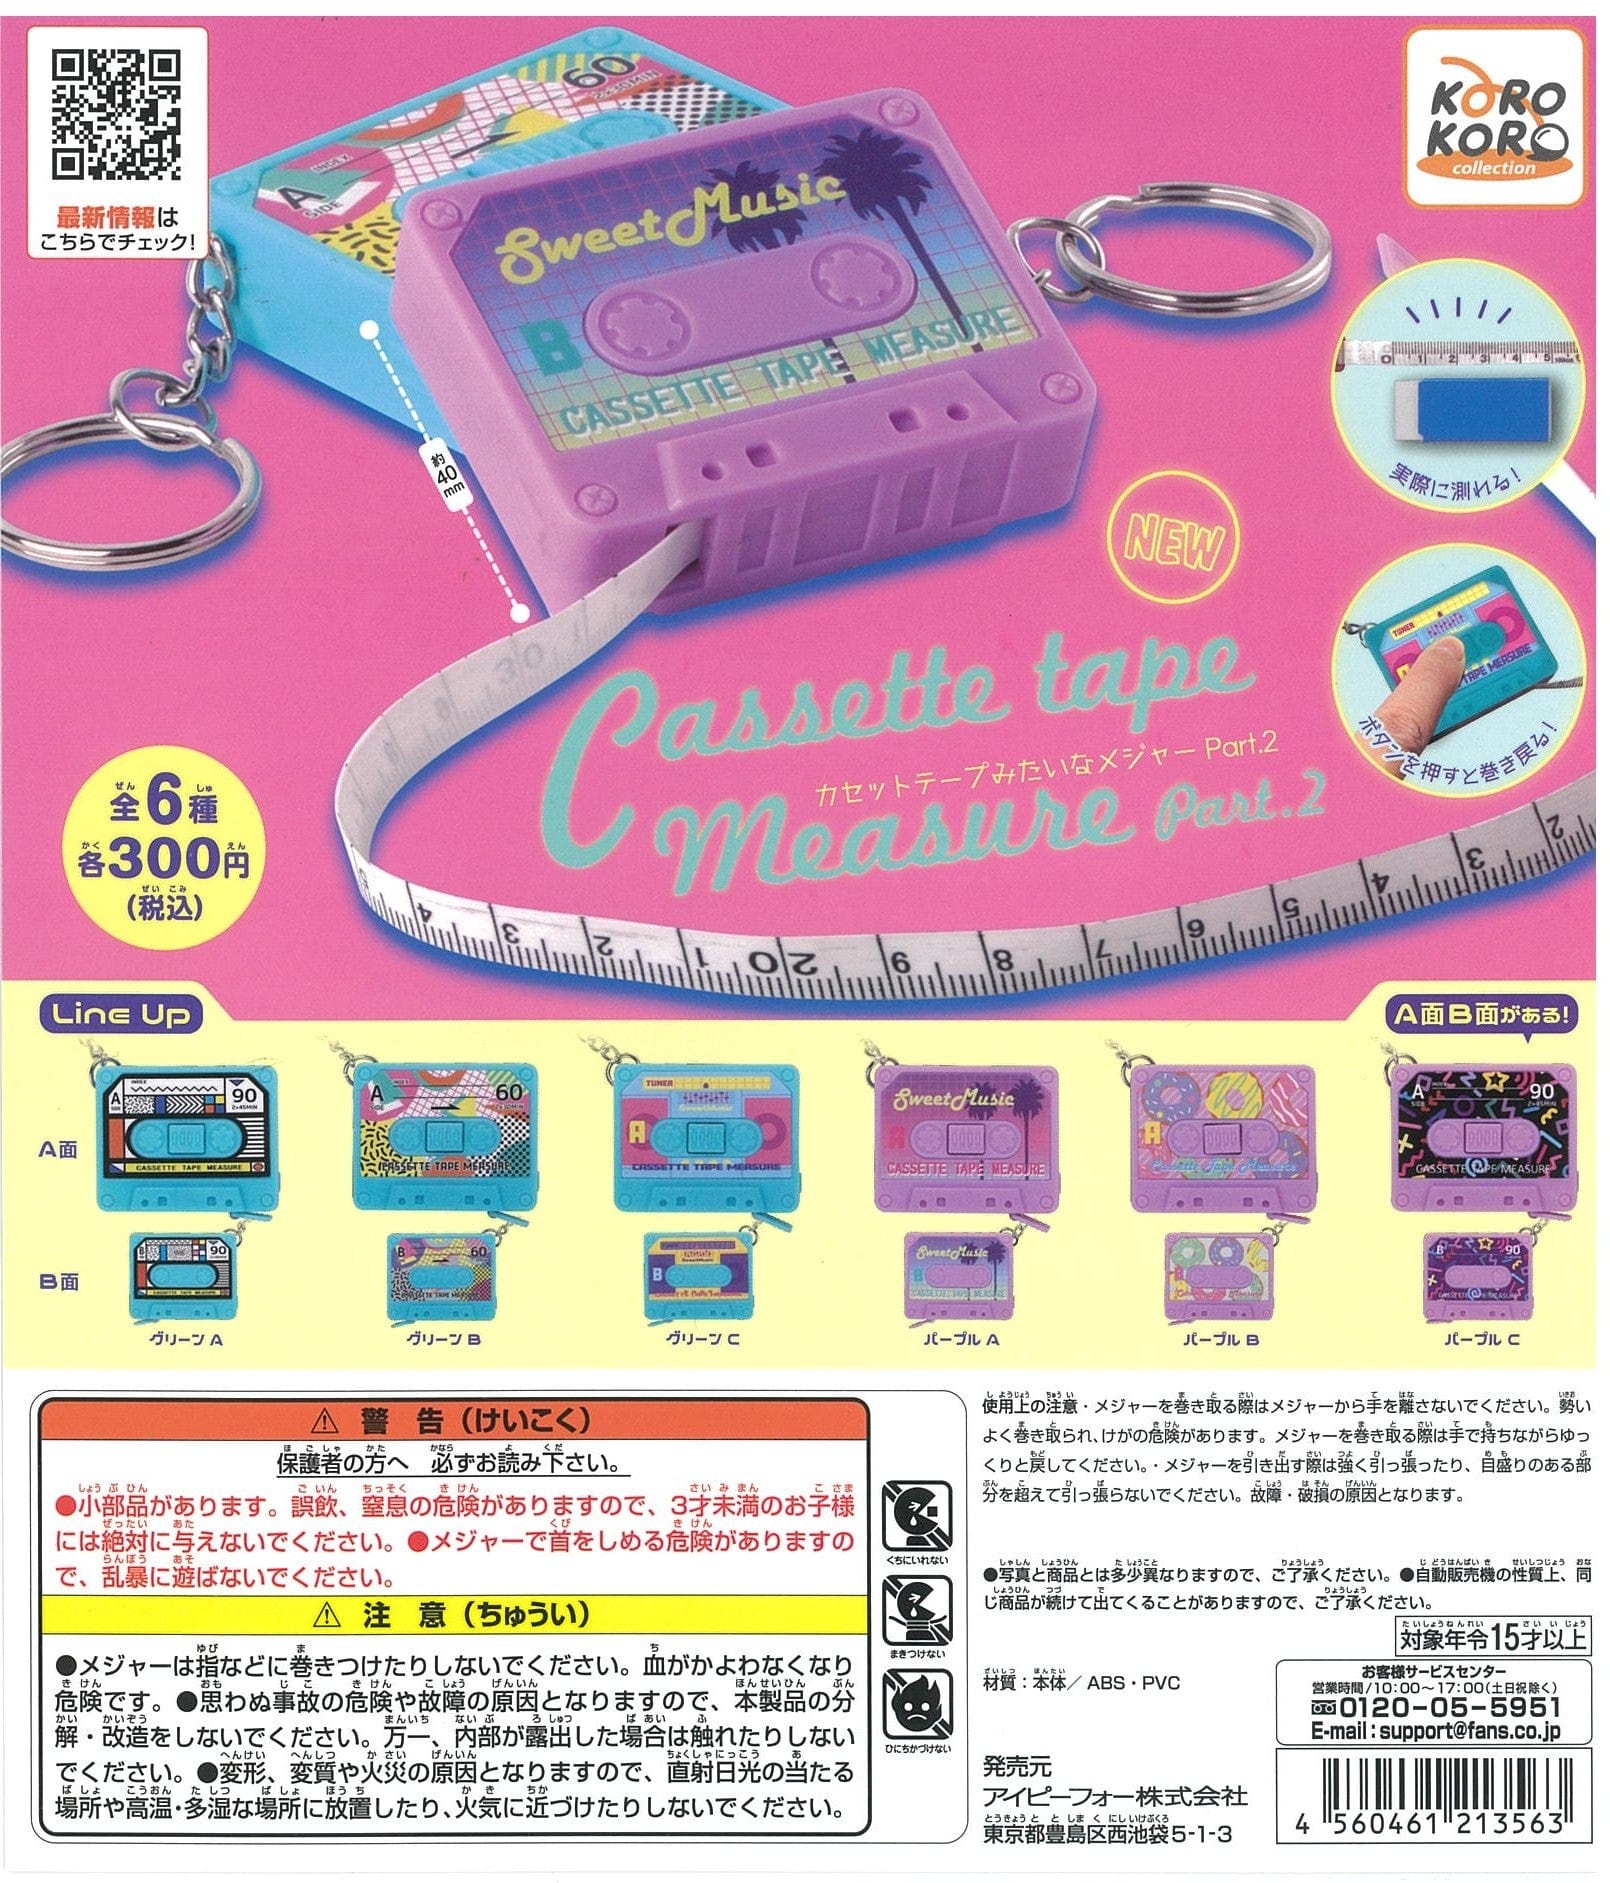 KoroKoro Collection CP2175 A Tape Measure Like a Cassette Tape Part 2